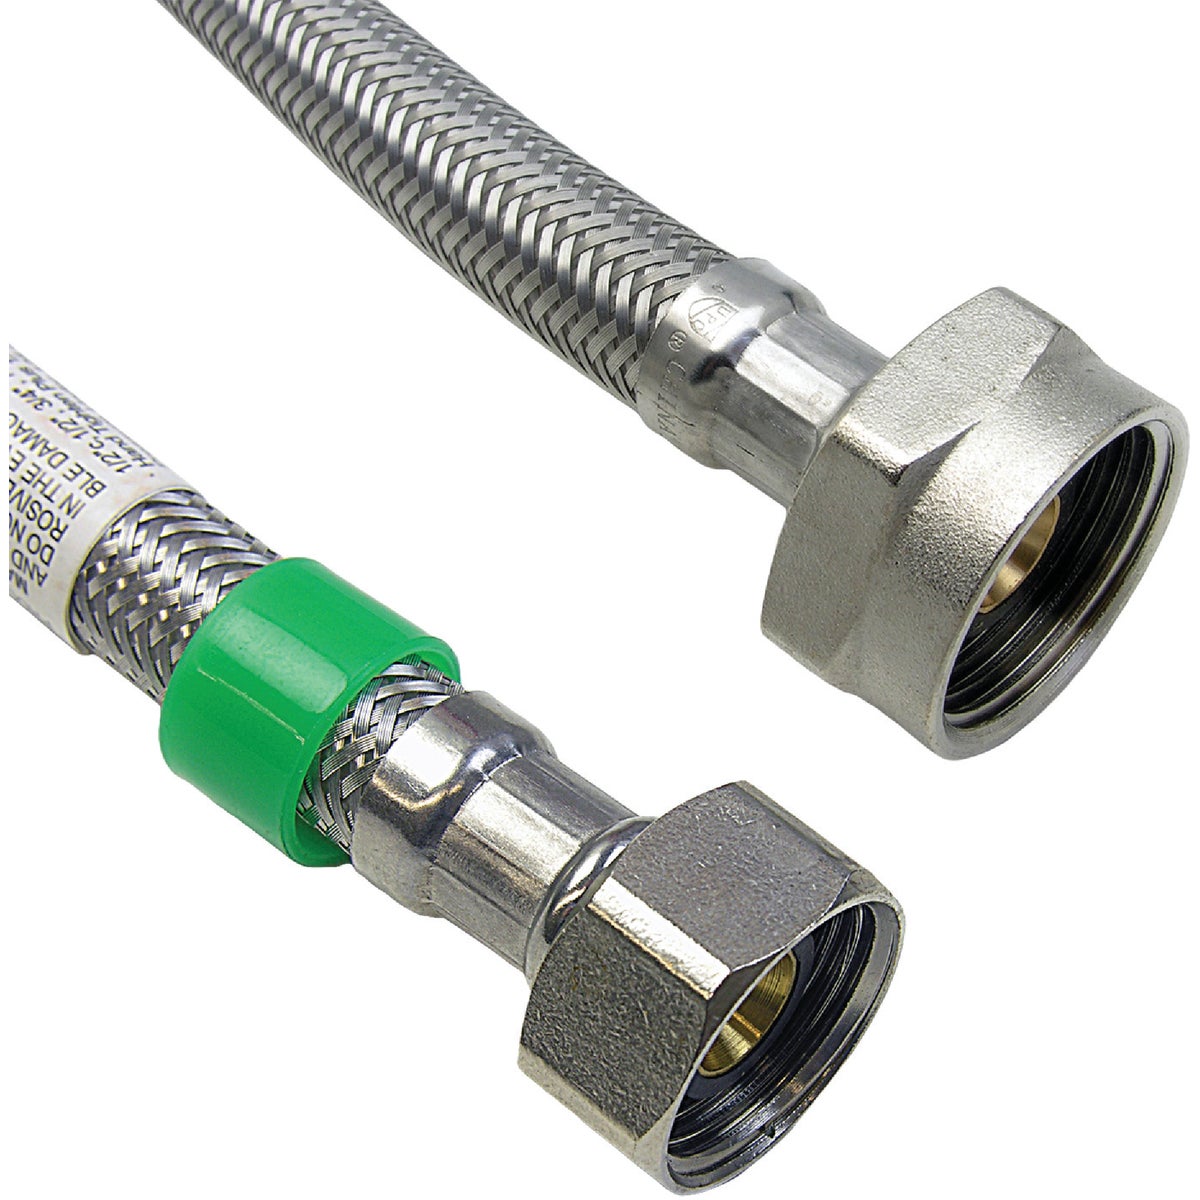 Lasco 1/2 In. IPS x 7/8 In. BC x 9 In. L Braided Stainless Steel Flex Line Toilet Connector